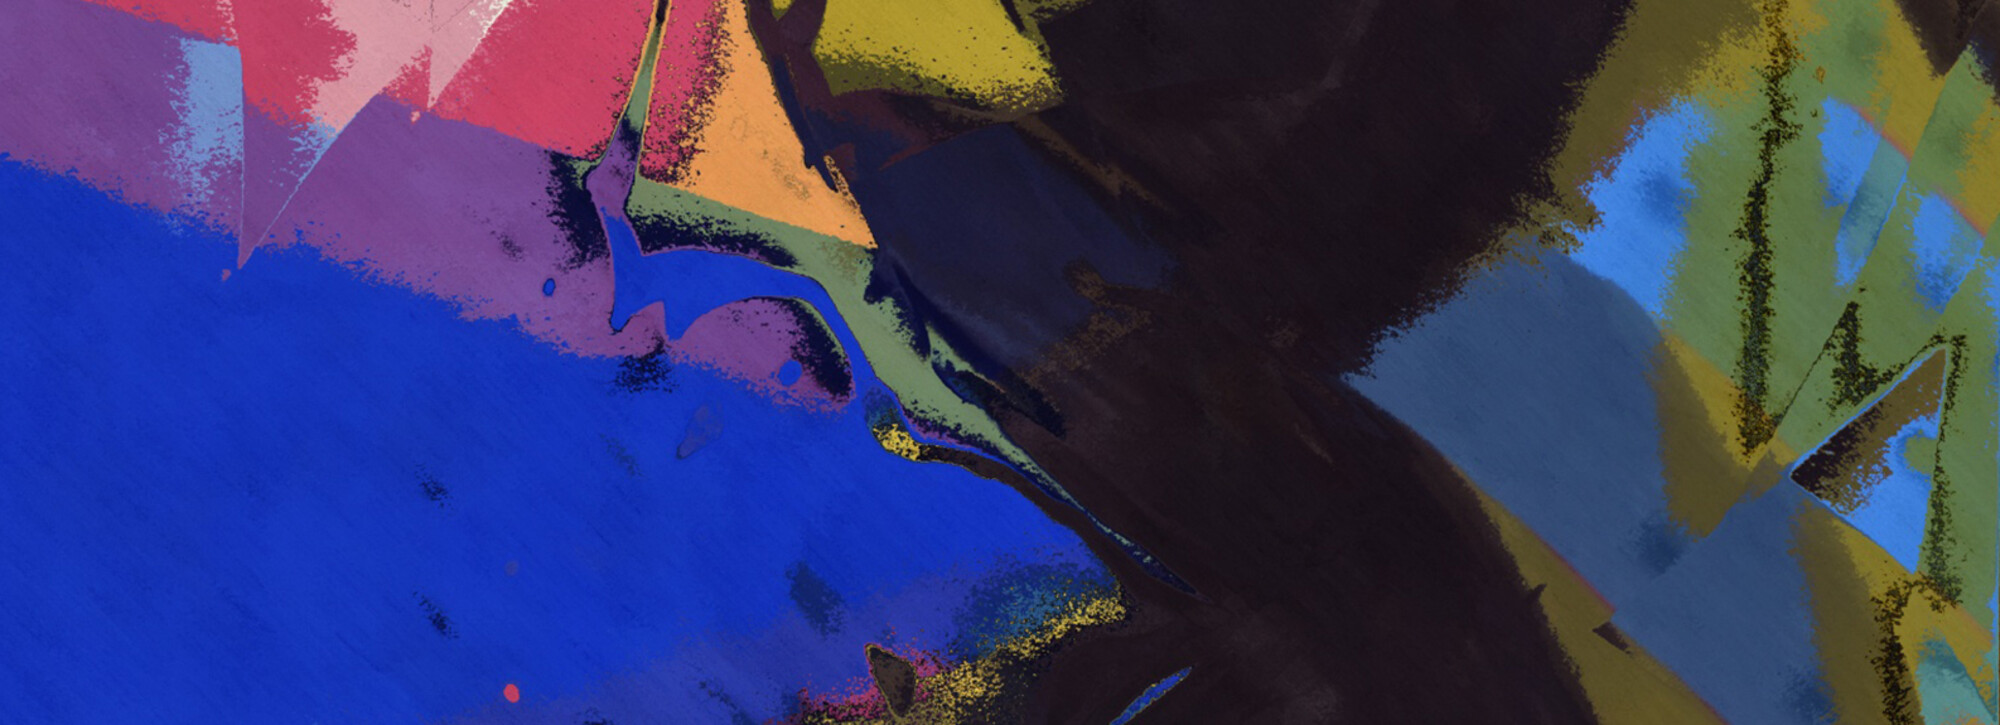 detail of colorful abstract painting